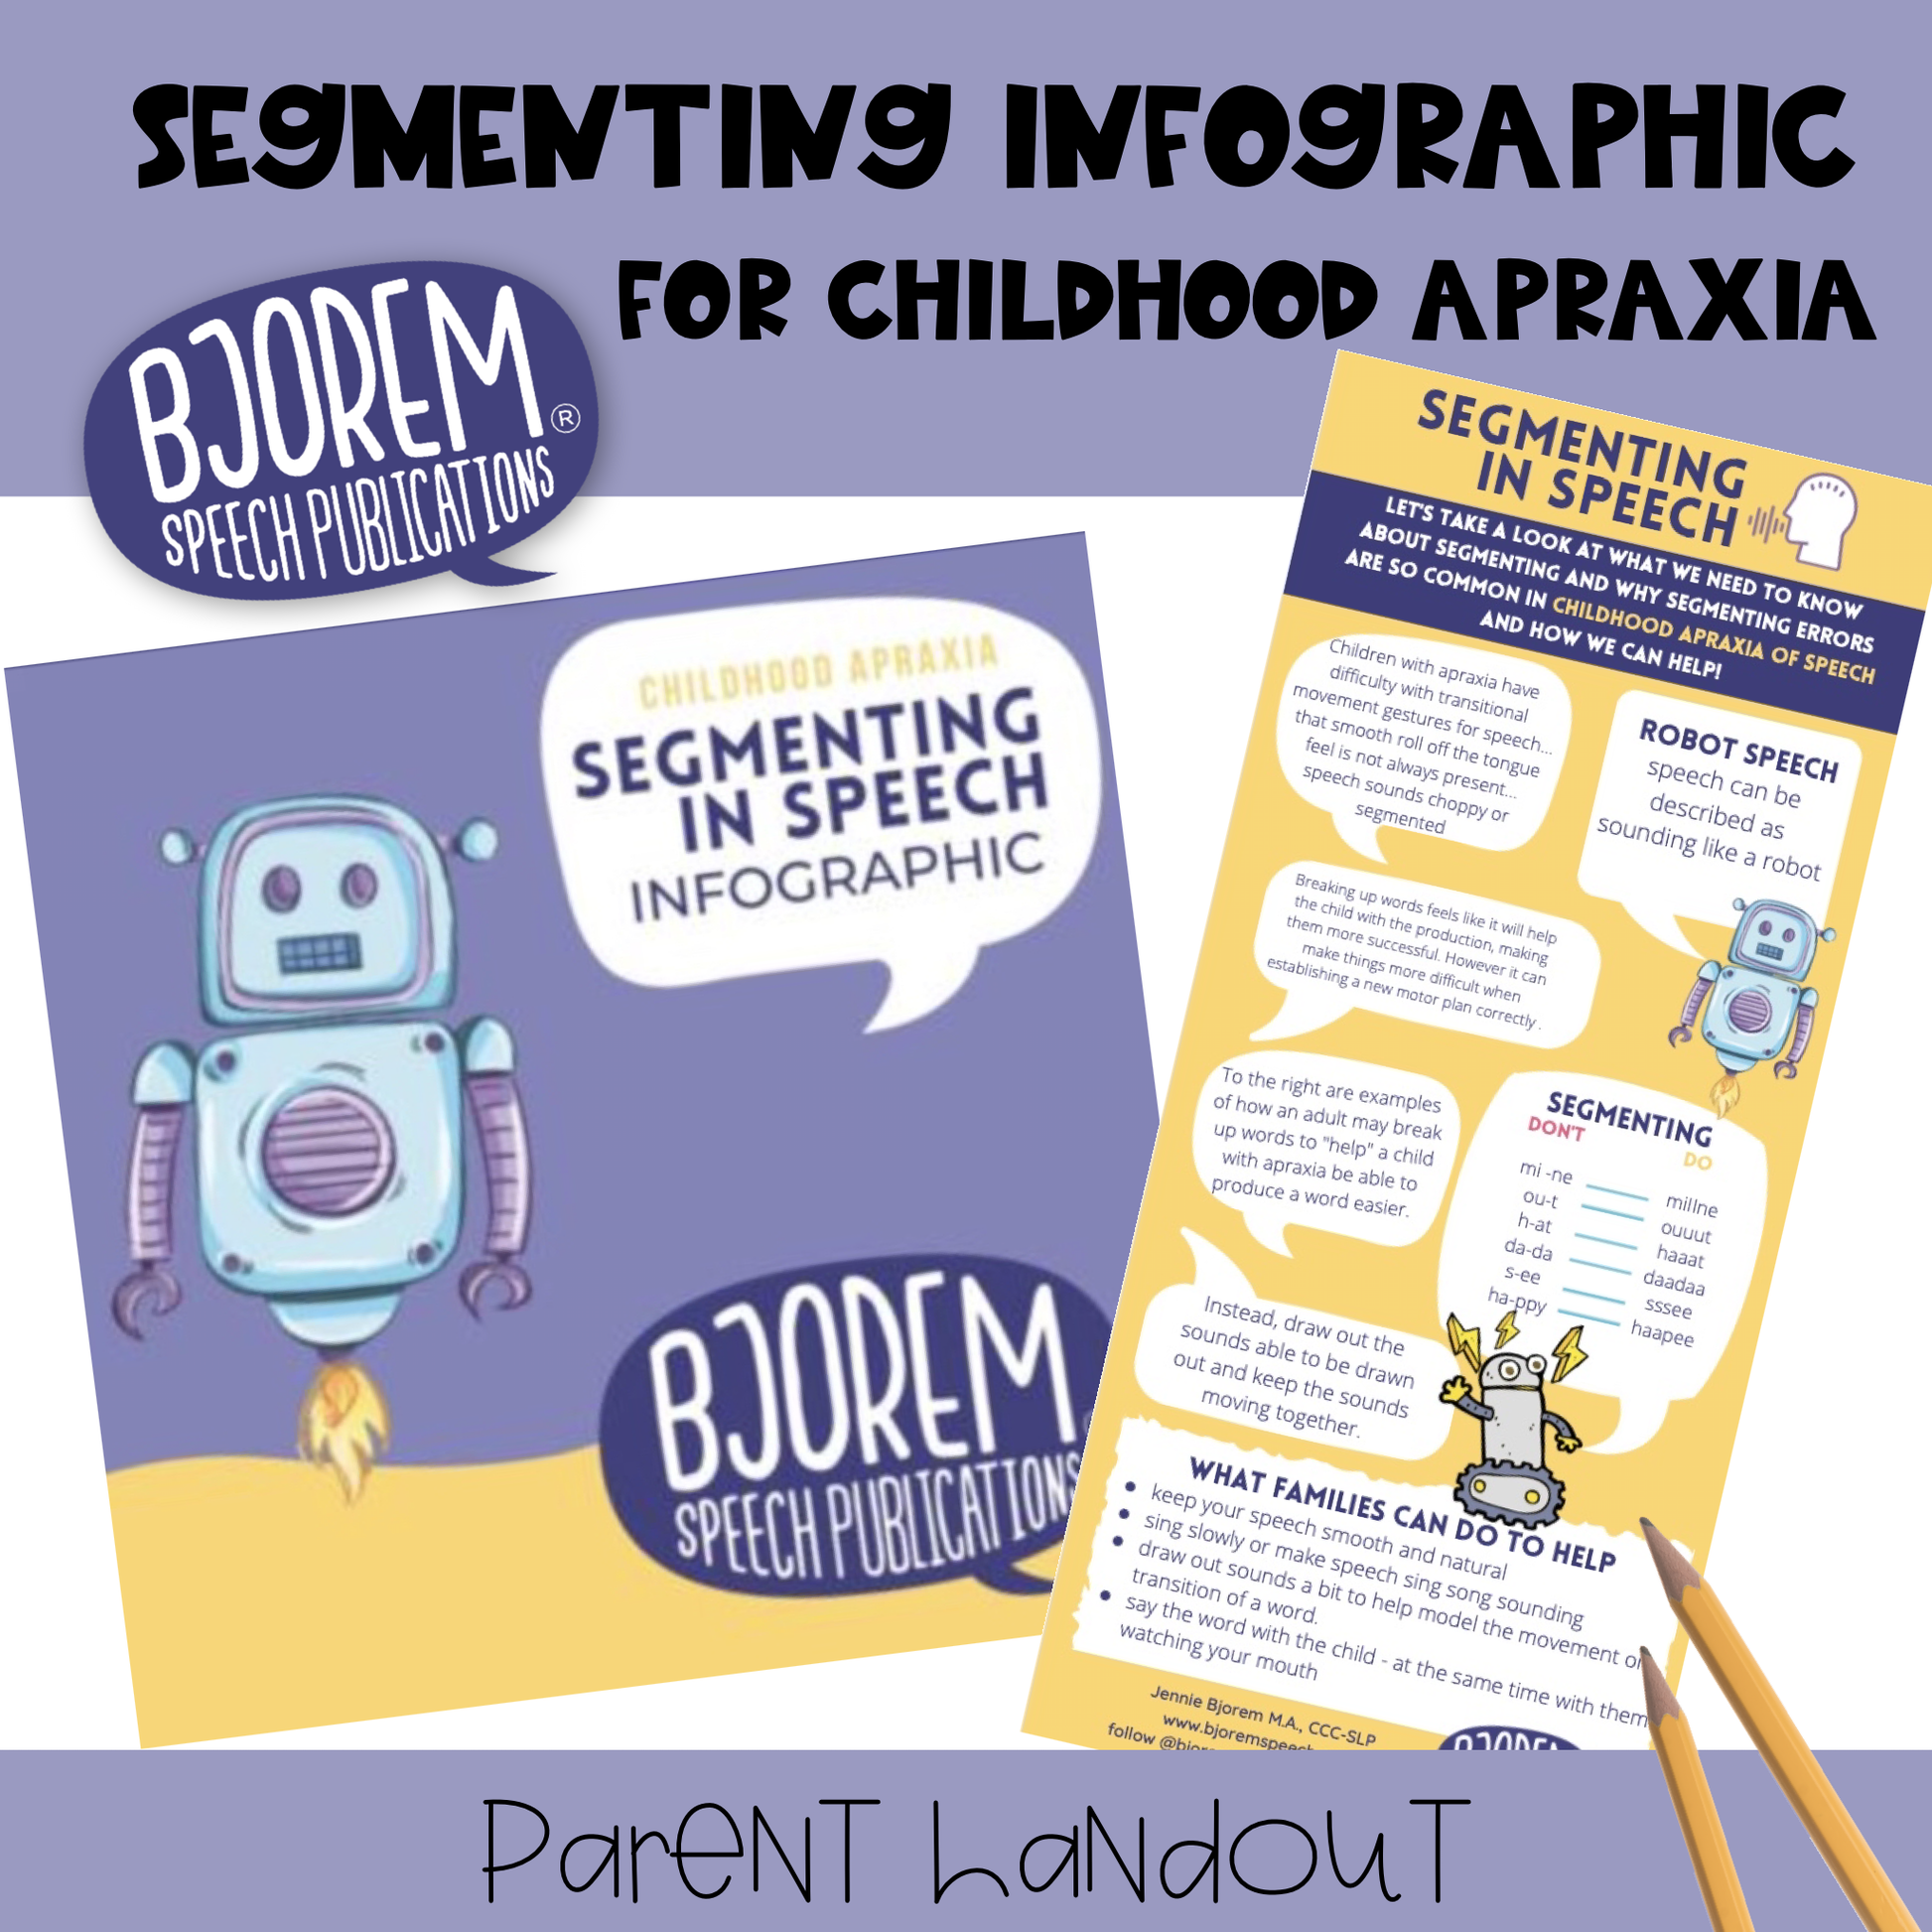 [title]Segmenting Infographic for Childhood Apraxia of Speech - Download